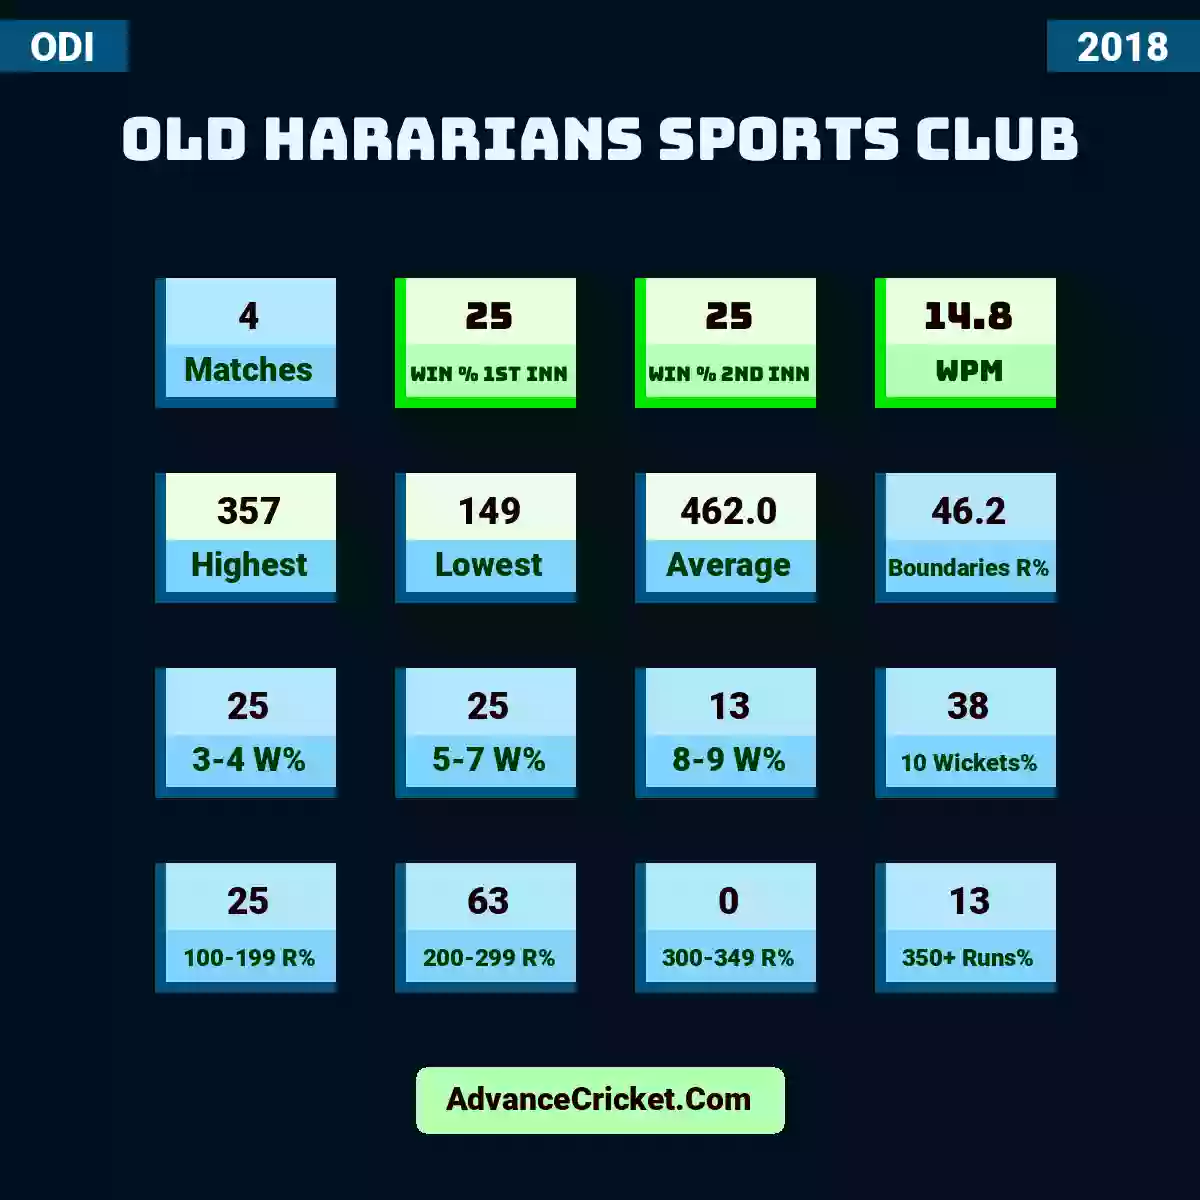 Image showing Old Hararians Sports Club with Matches: 4, Win % 1st Inn: 25, Win % 2nd Inn: 25, WPM: 14.8, Highest: 357, Lowest: 149, Average: 462.0, Boundaries R%: 46.2, 3-4 W%: 25, 5-7 W%: 25, 8-9 W%: 13, 10 Wickets%: 38, 100-199 R%: 25, 200-299 R%: 63, 300-349 R%: 0, 350+ Runs%: 13.